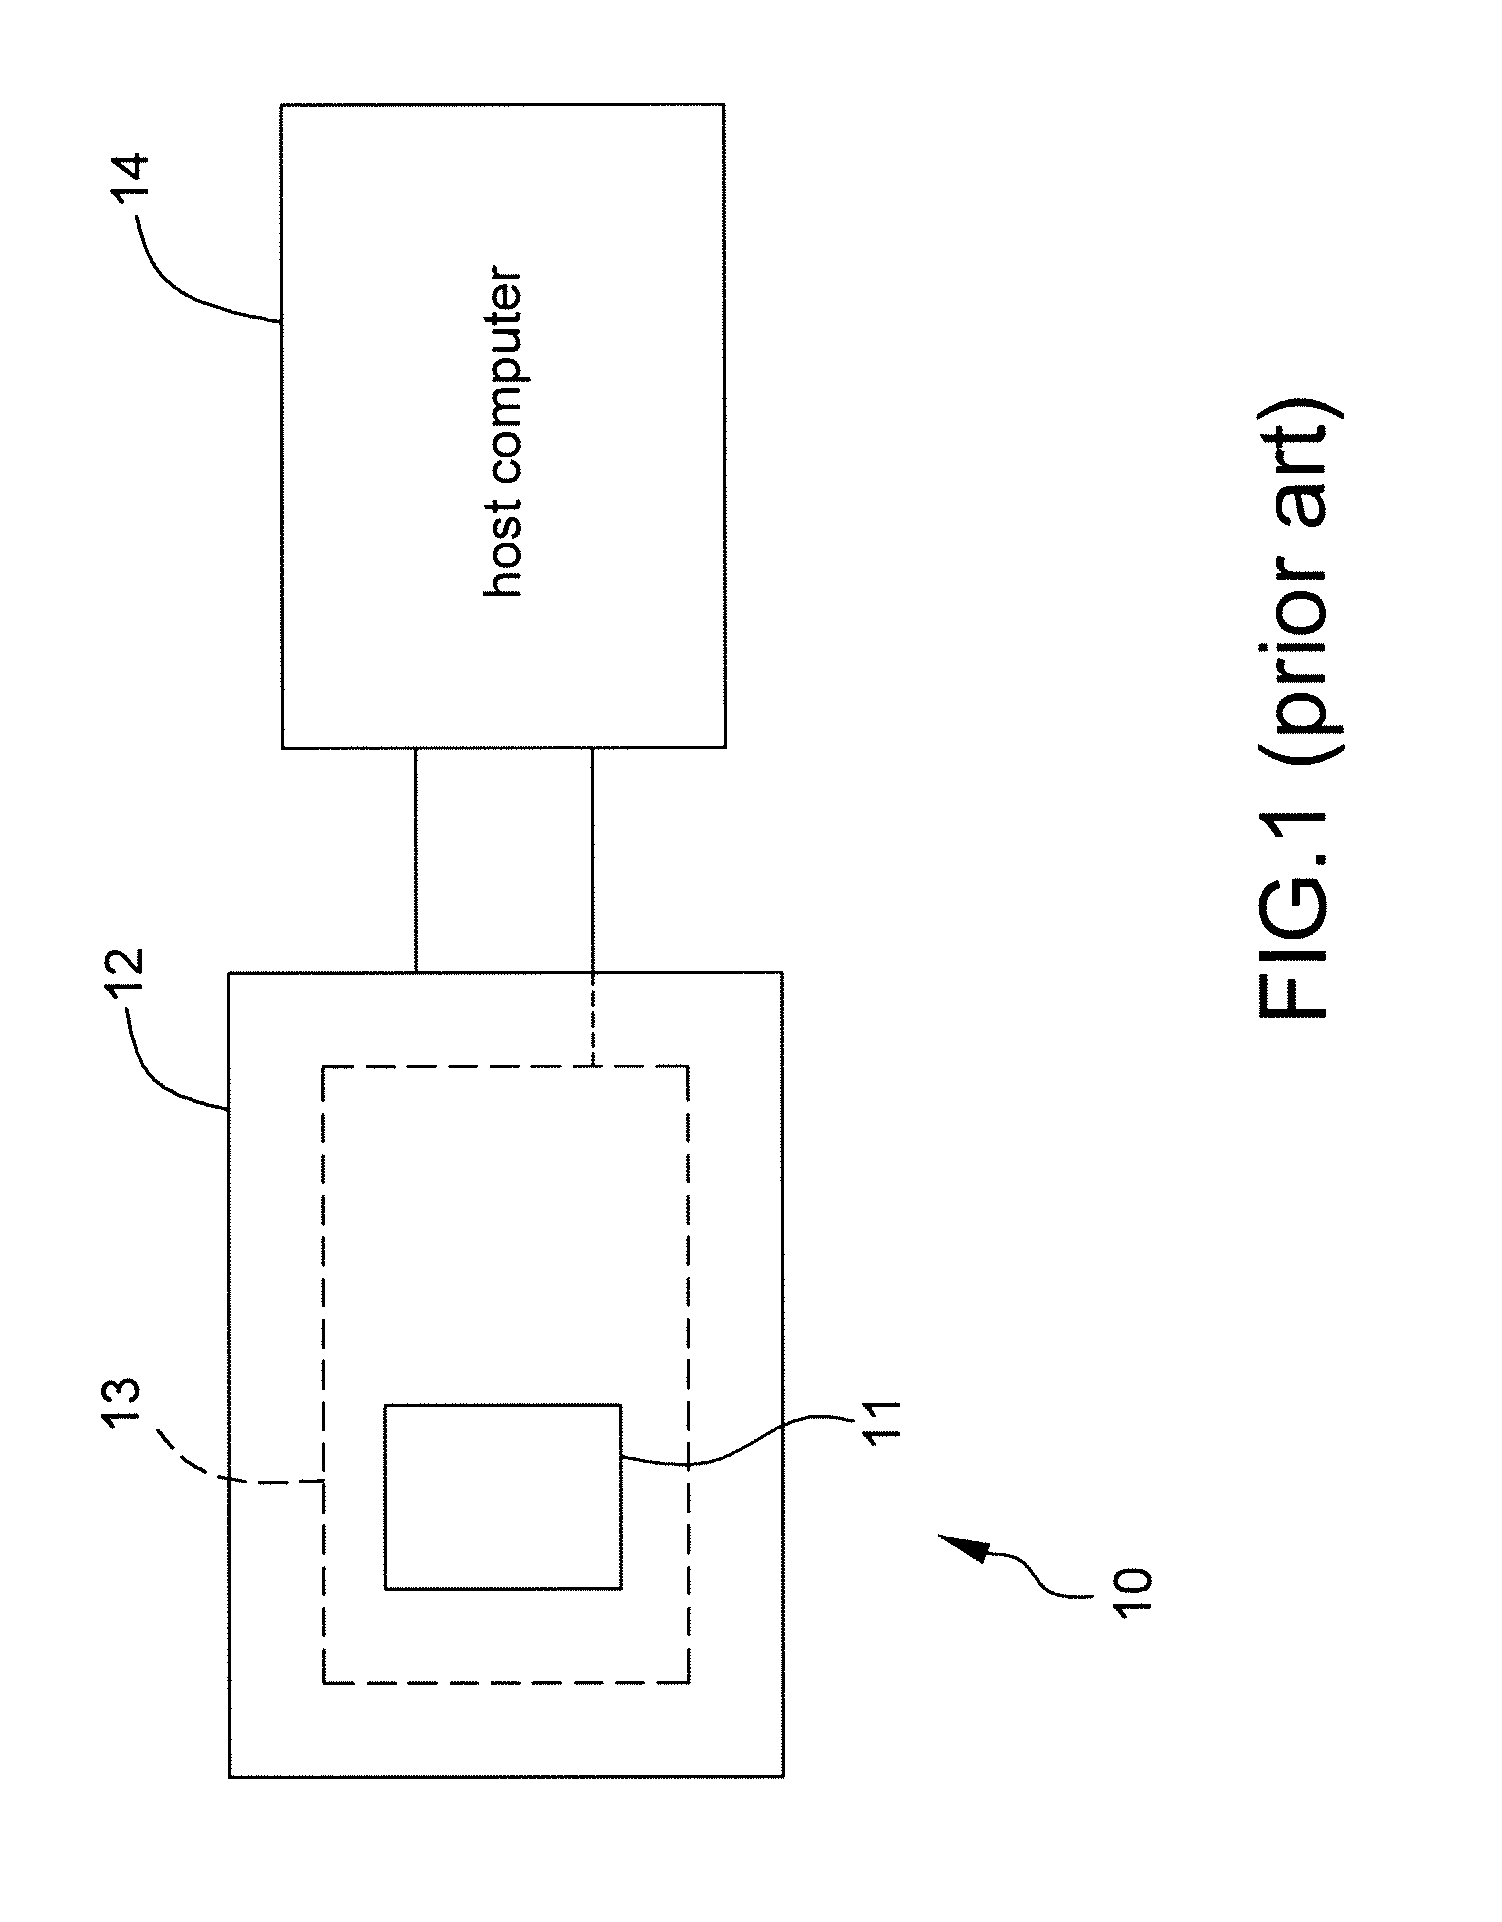 Radio frequency charging system